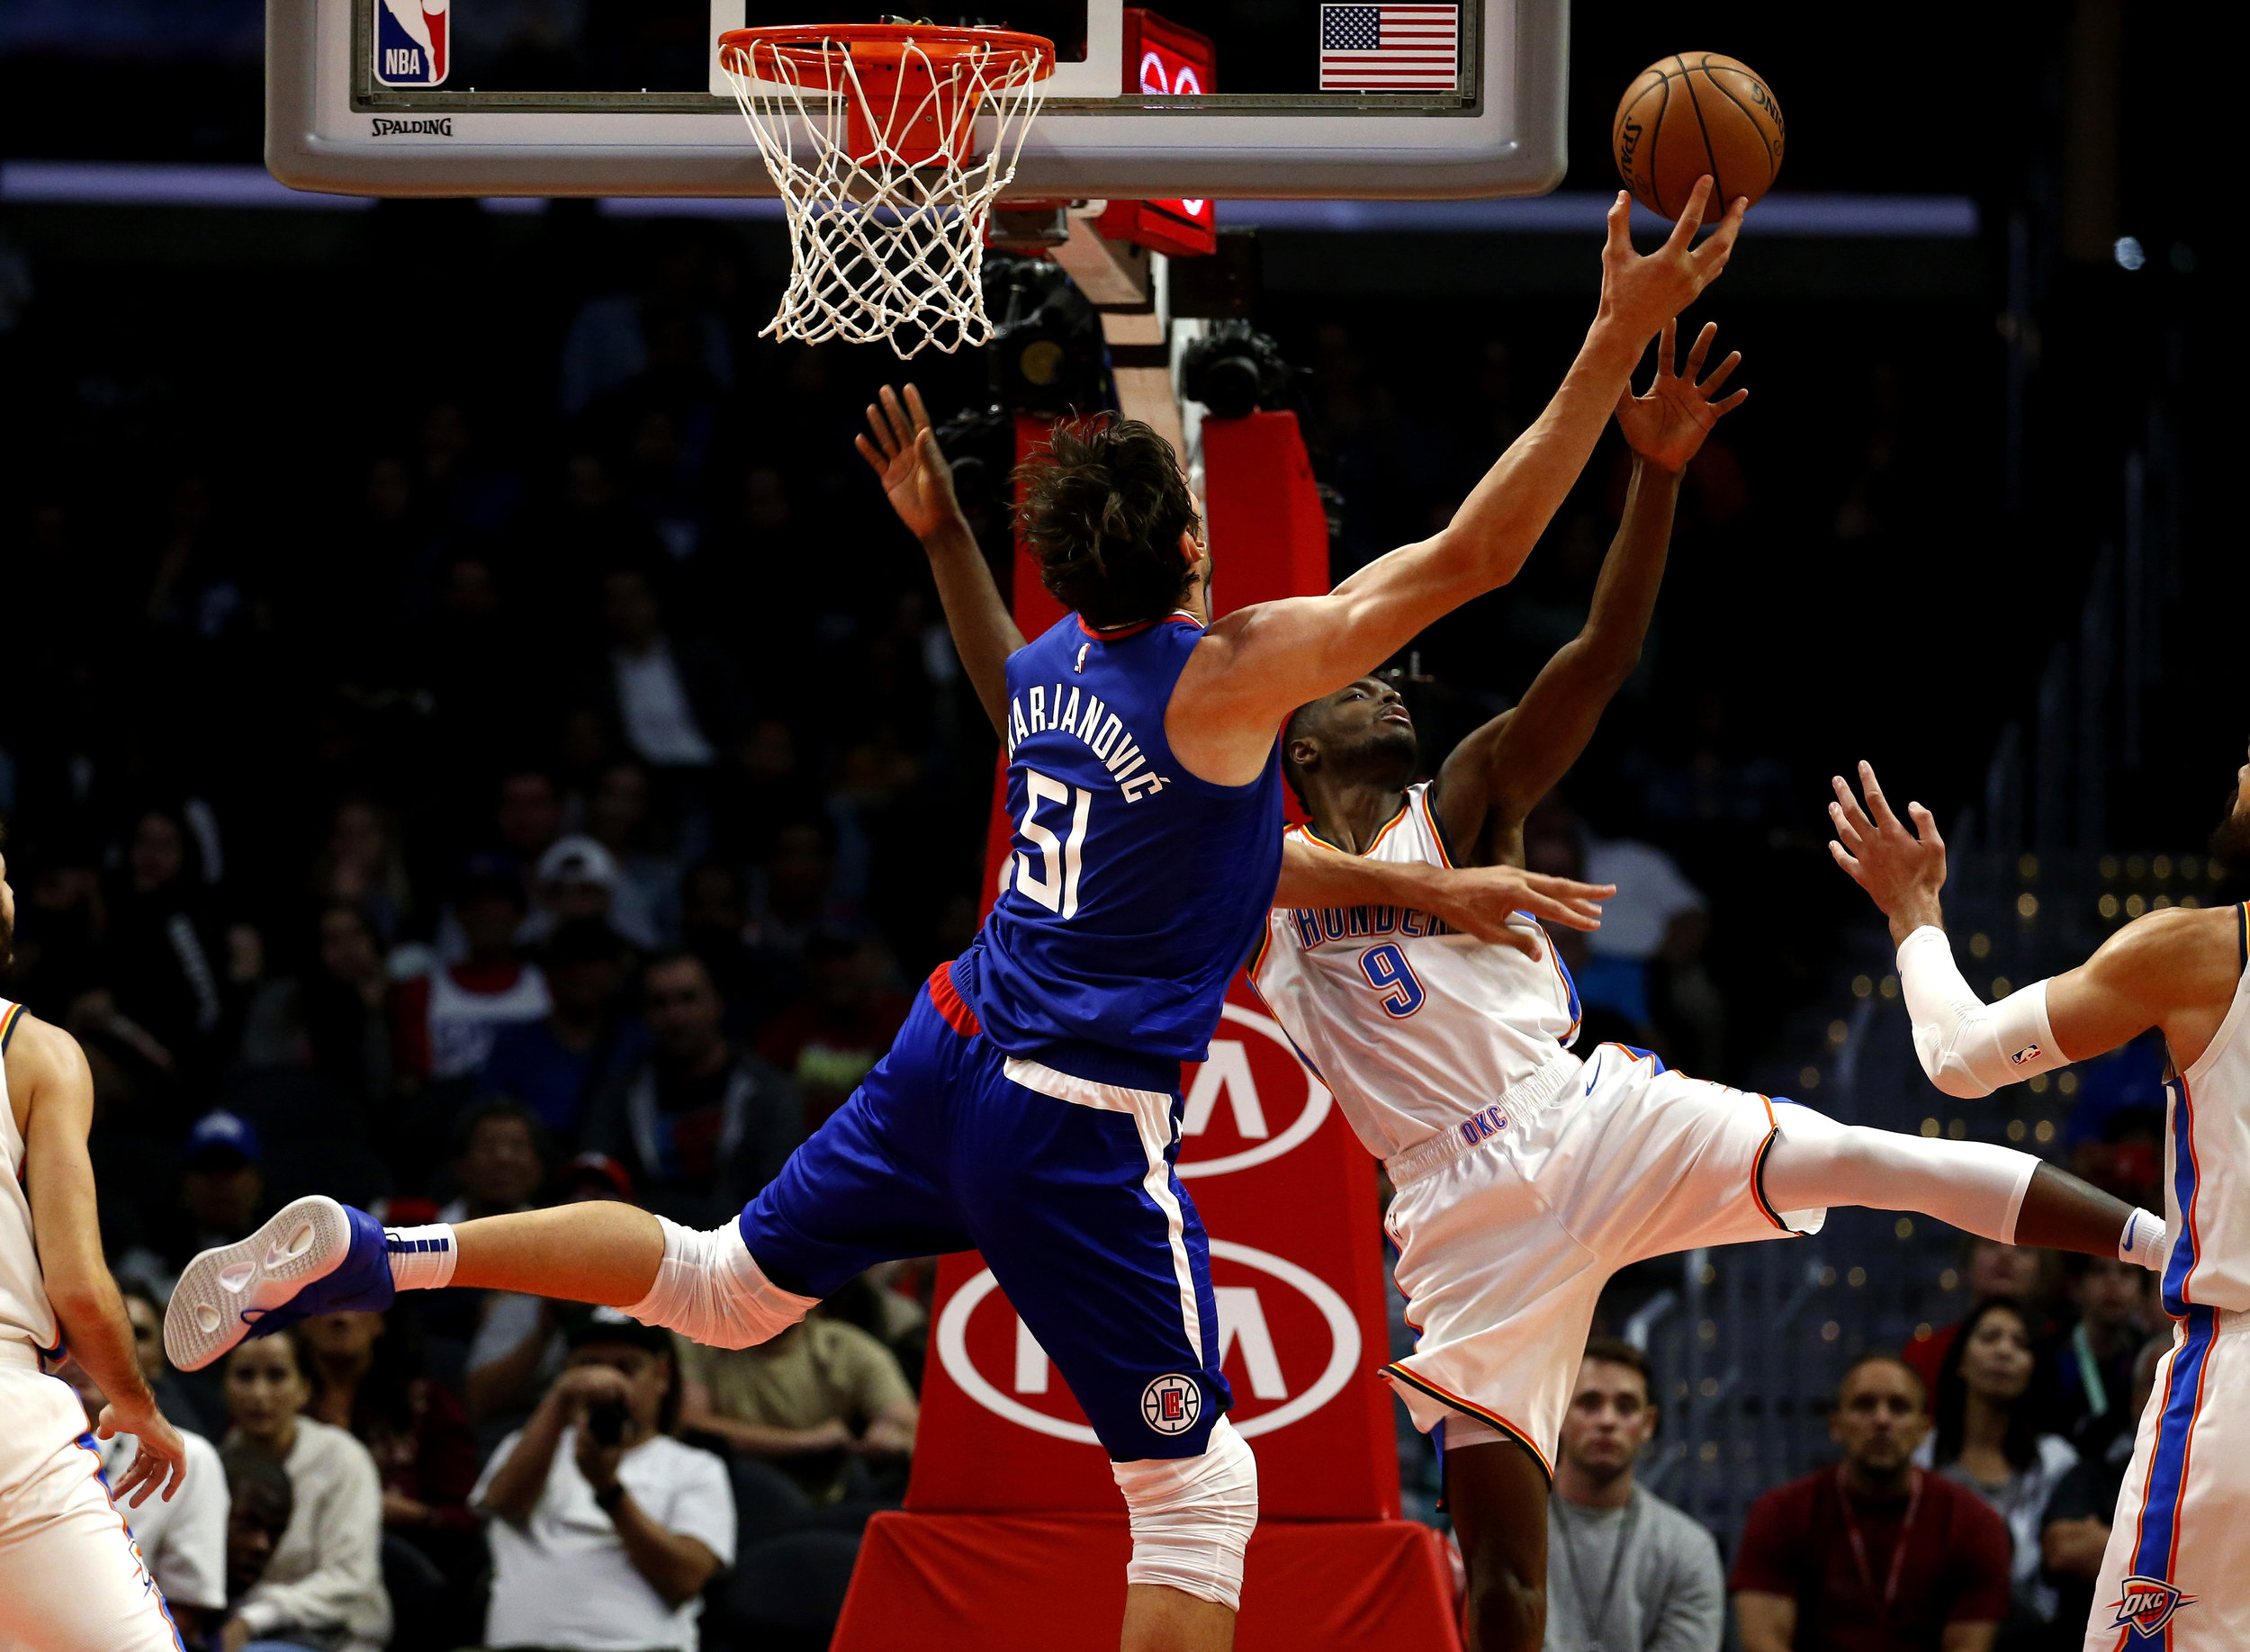  Los Angeles Clippers’ Boban Marjanovic (51) goes up to the basket agains Oklahoma City Thunder’s Jerami Grant (9) during the second half of an NBA basketball game Friday, Oct. 19, 2018, in Los Angeles. Clipper won 108-92.  